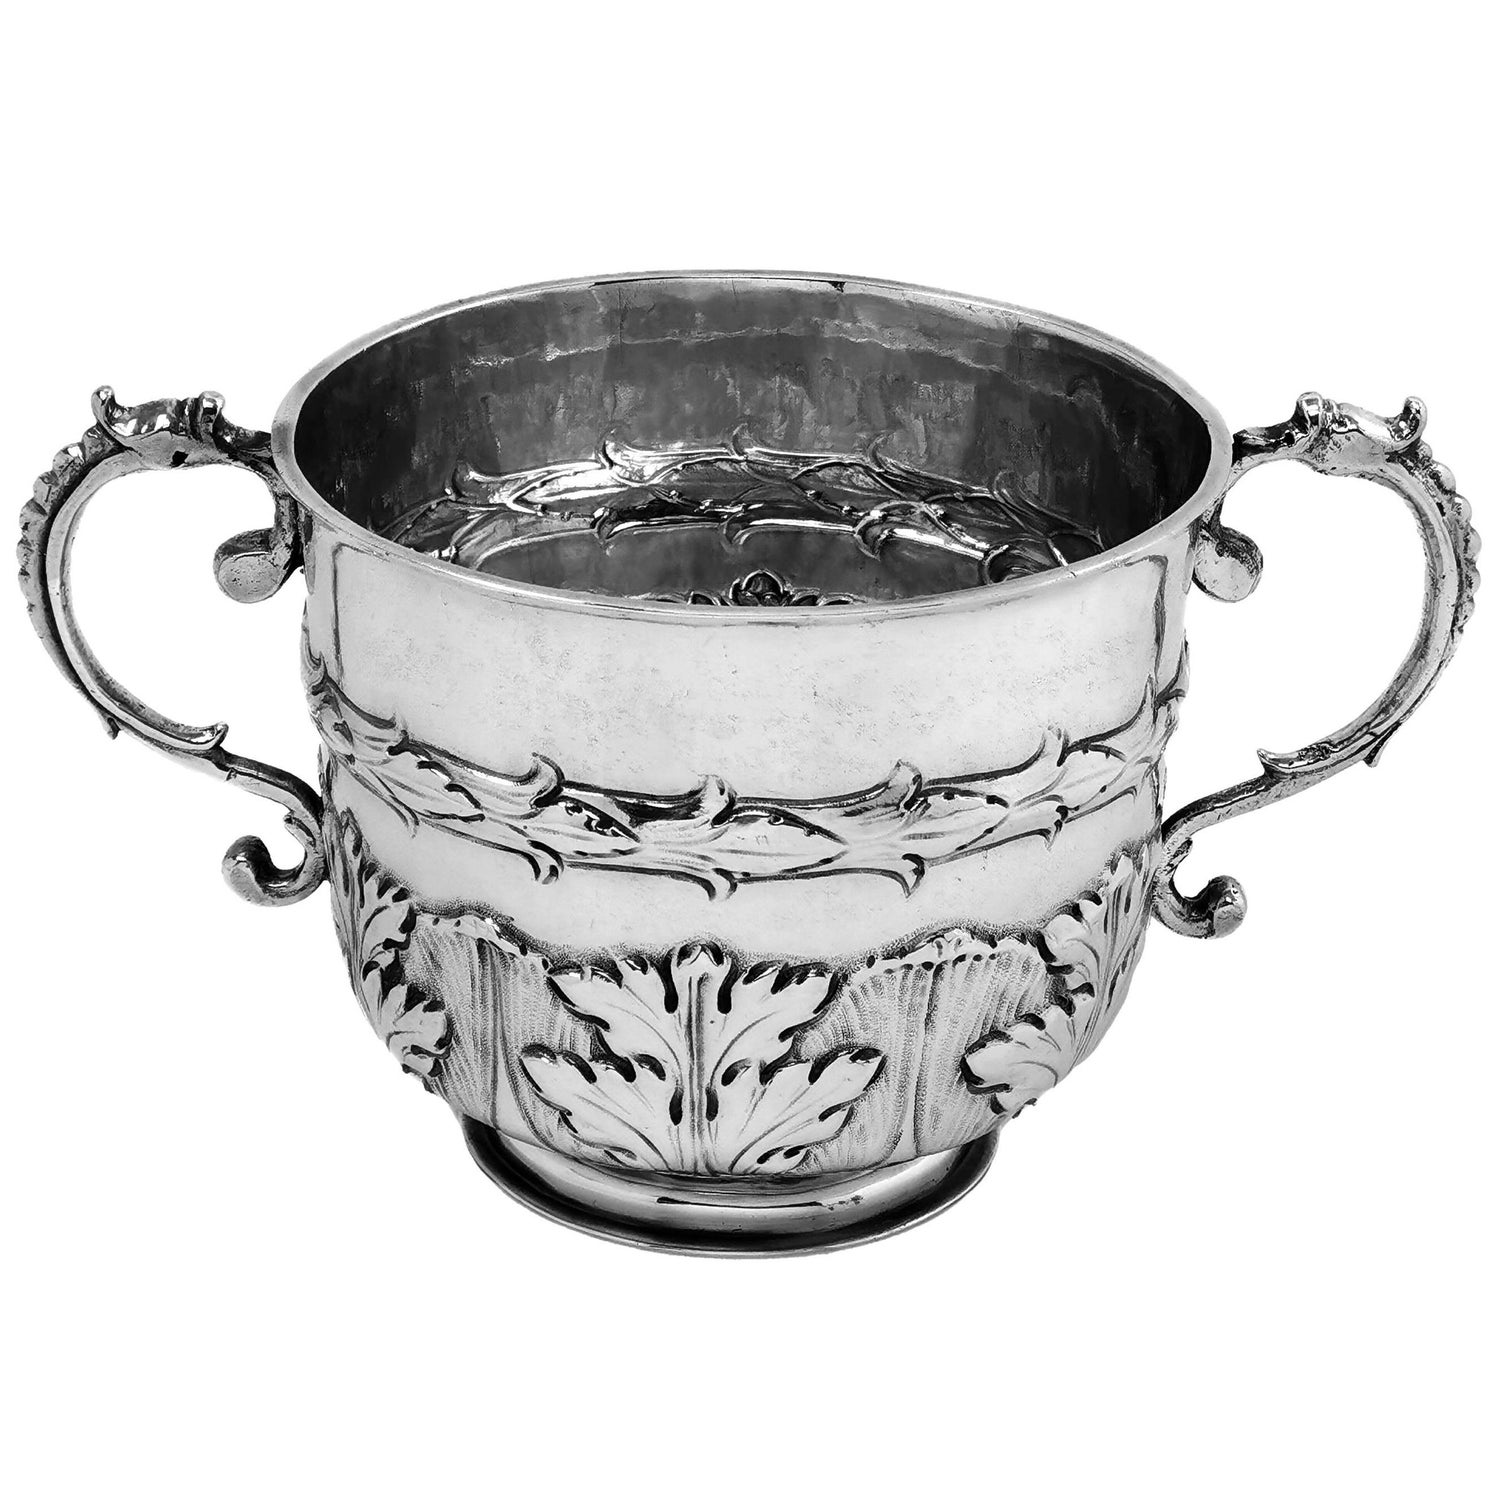 Antique Charles II 17th Century Sterling Silver Porringer Cup, 1679